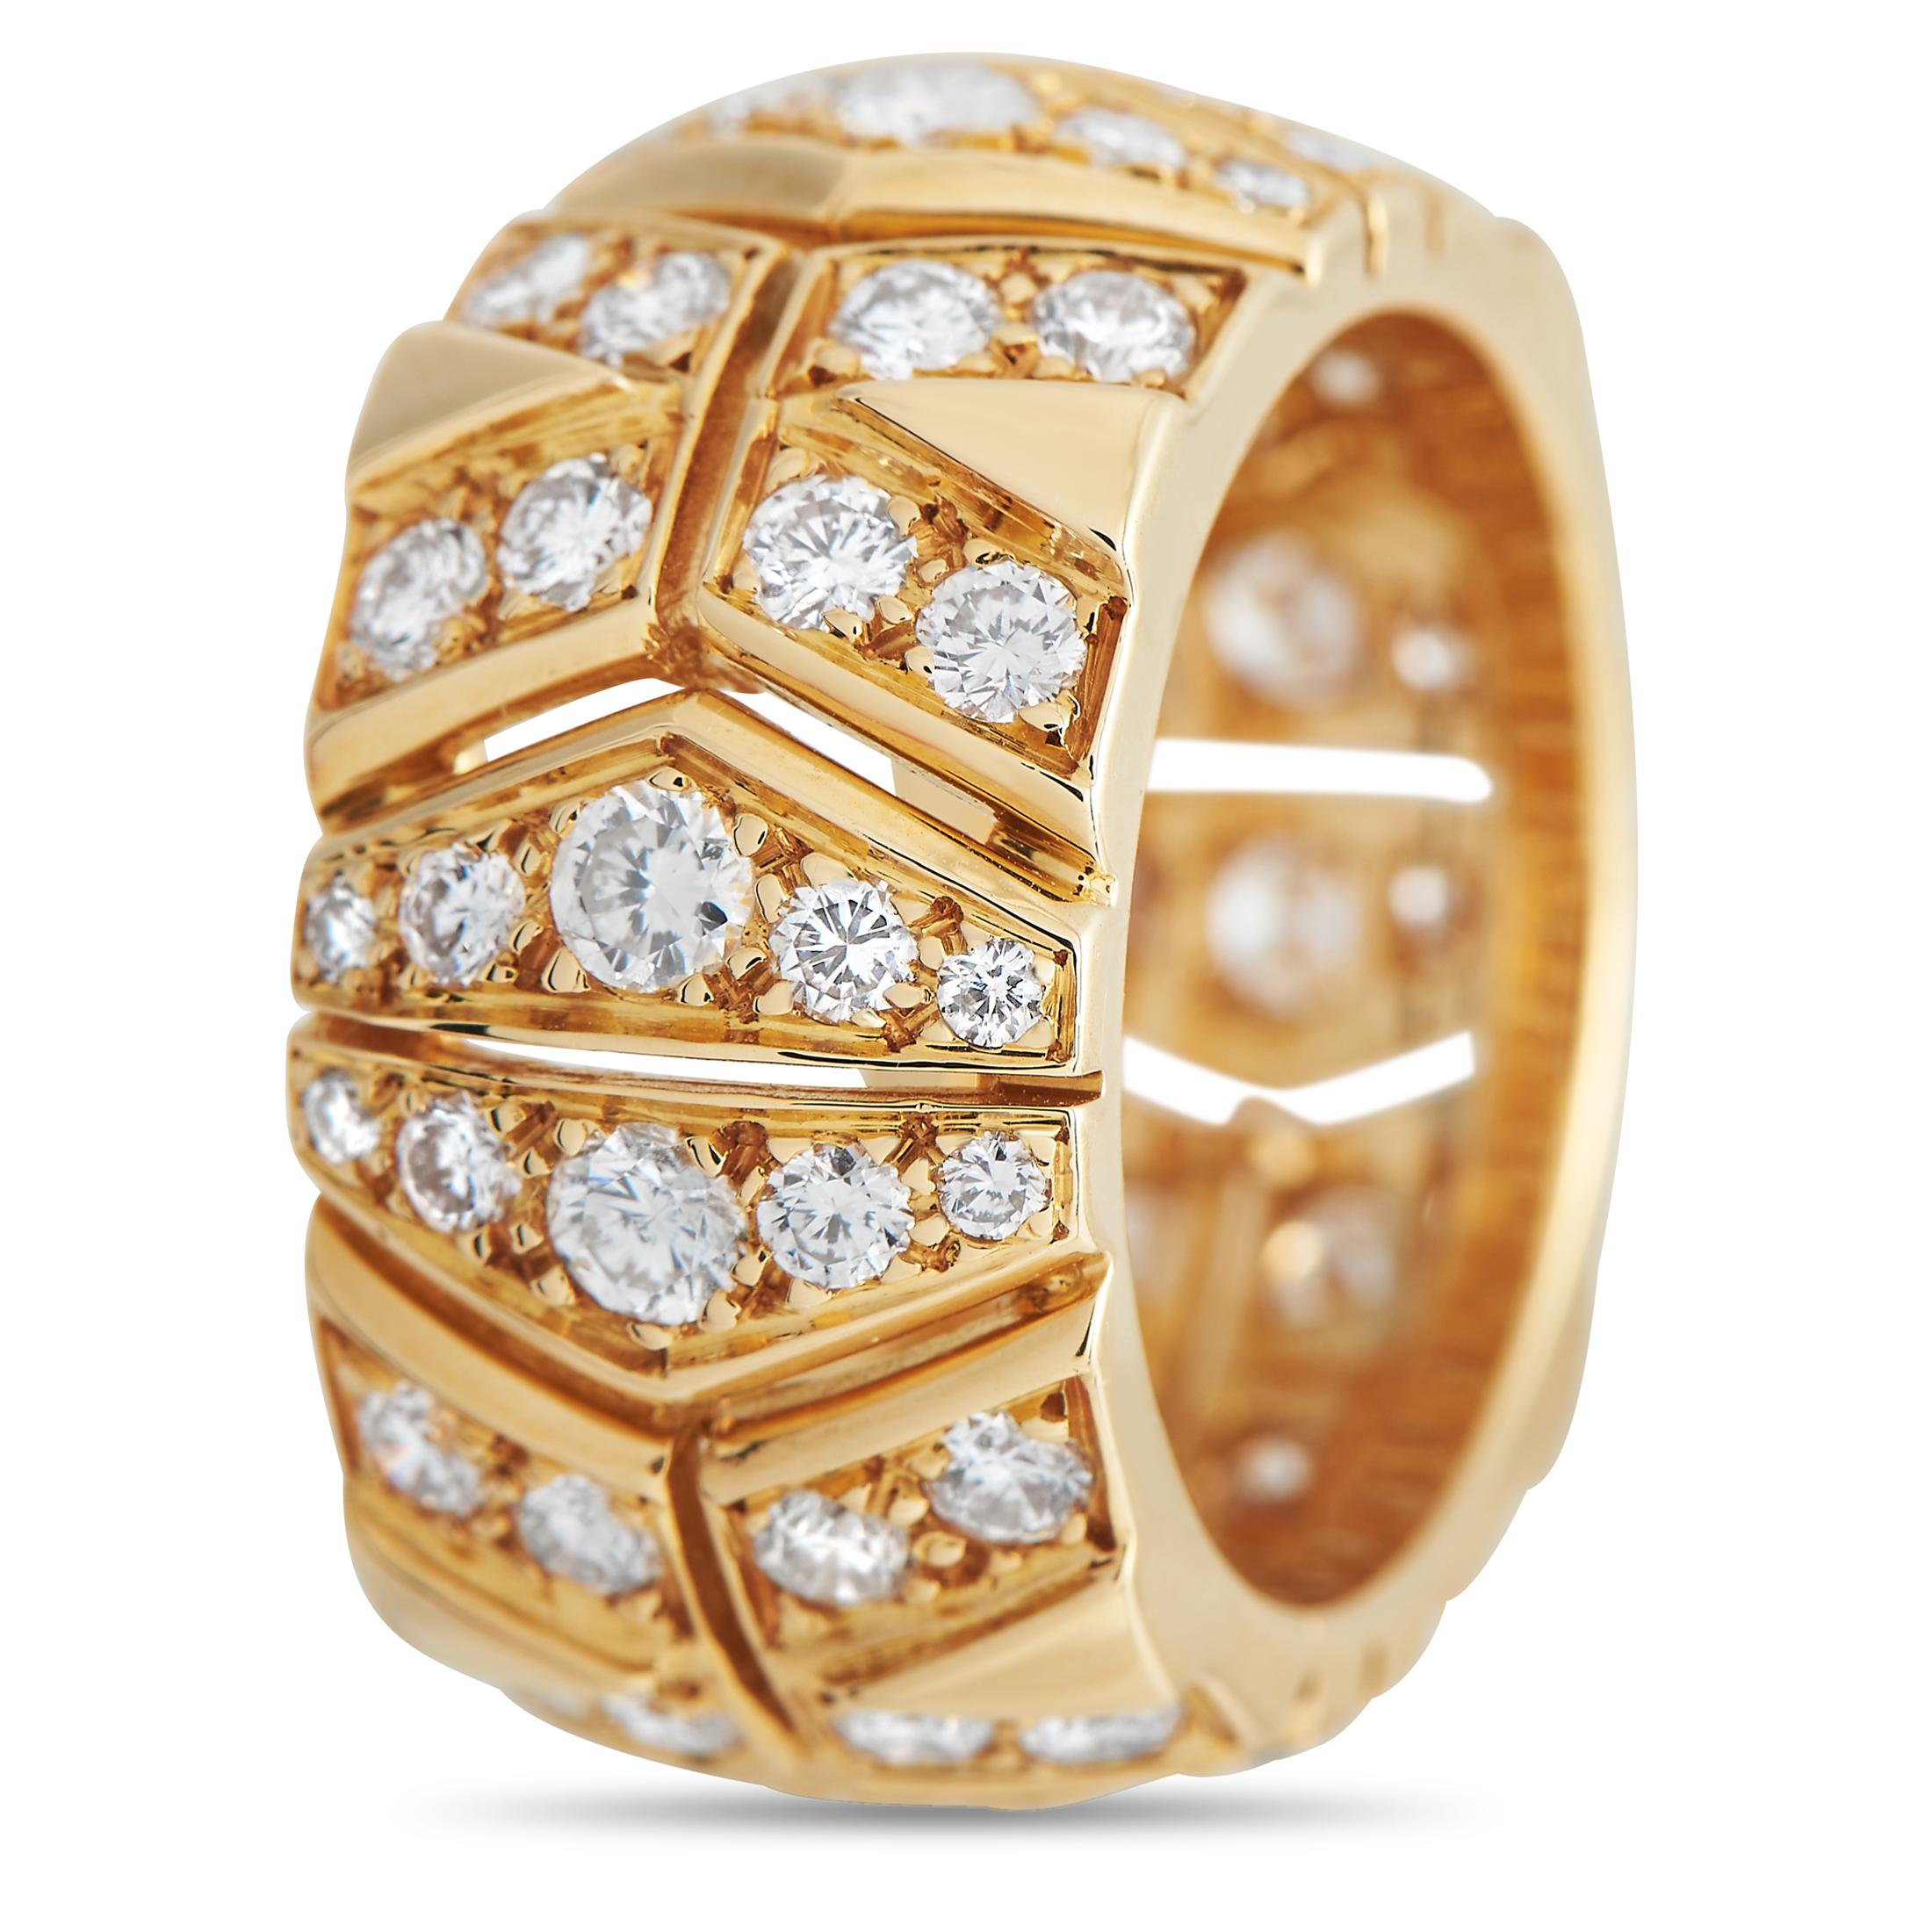 Diamonds with a total weight of 2.25 carats allow this simple, elegant Cartier Rivoli ring to effortlessly catch the light. Ideal for everyday wear, this luxury ring measures 10mm wide.\r\nThis jewelry piece is offered in estate condition and